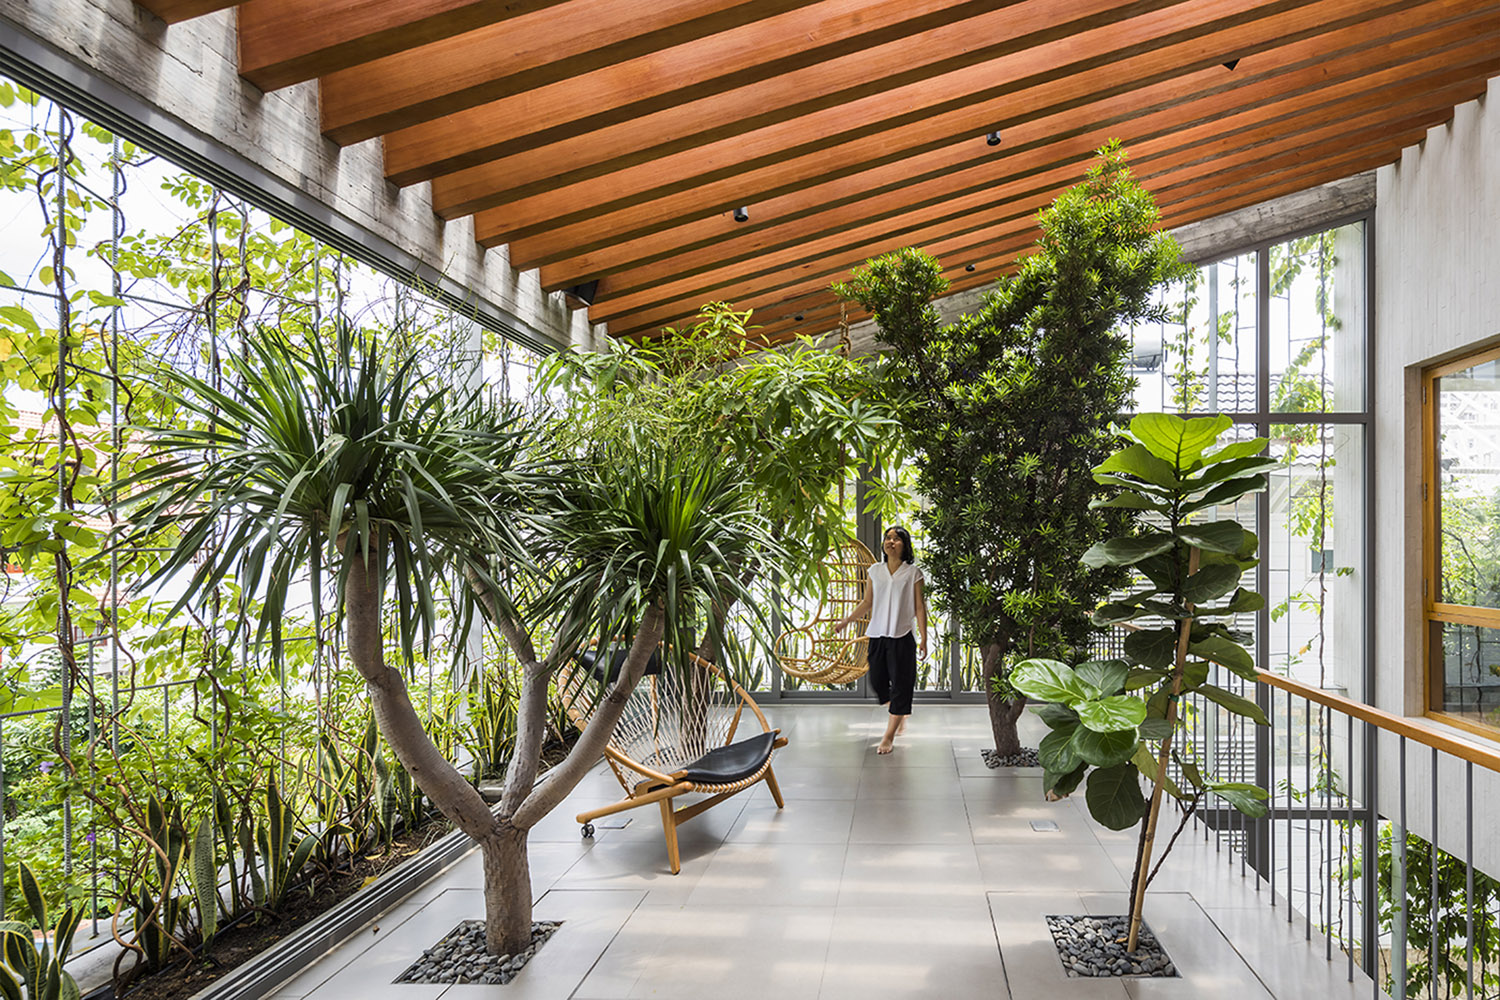 Stepping Park House: the Vietnamese challenge of integrating greenery into architecture